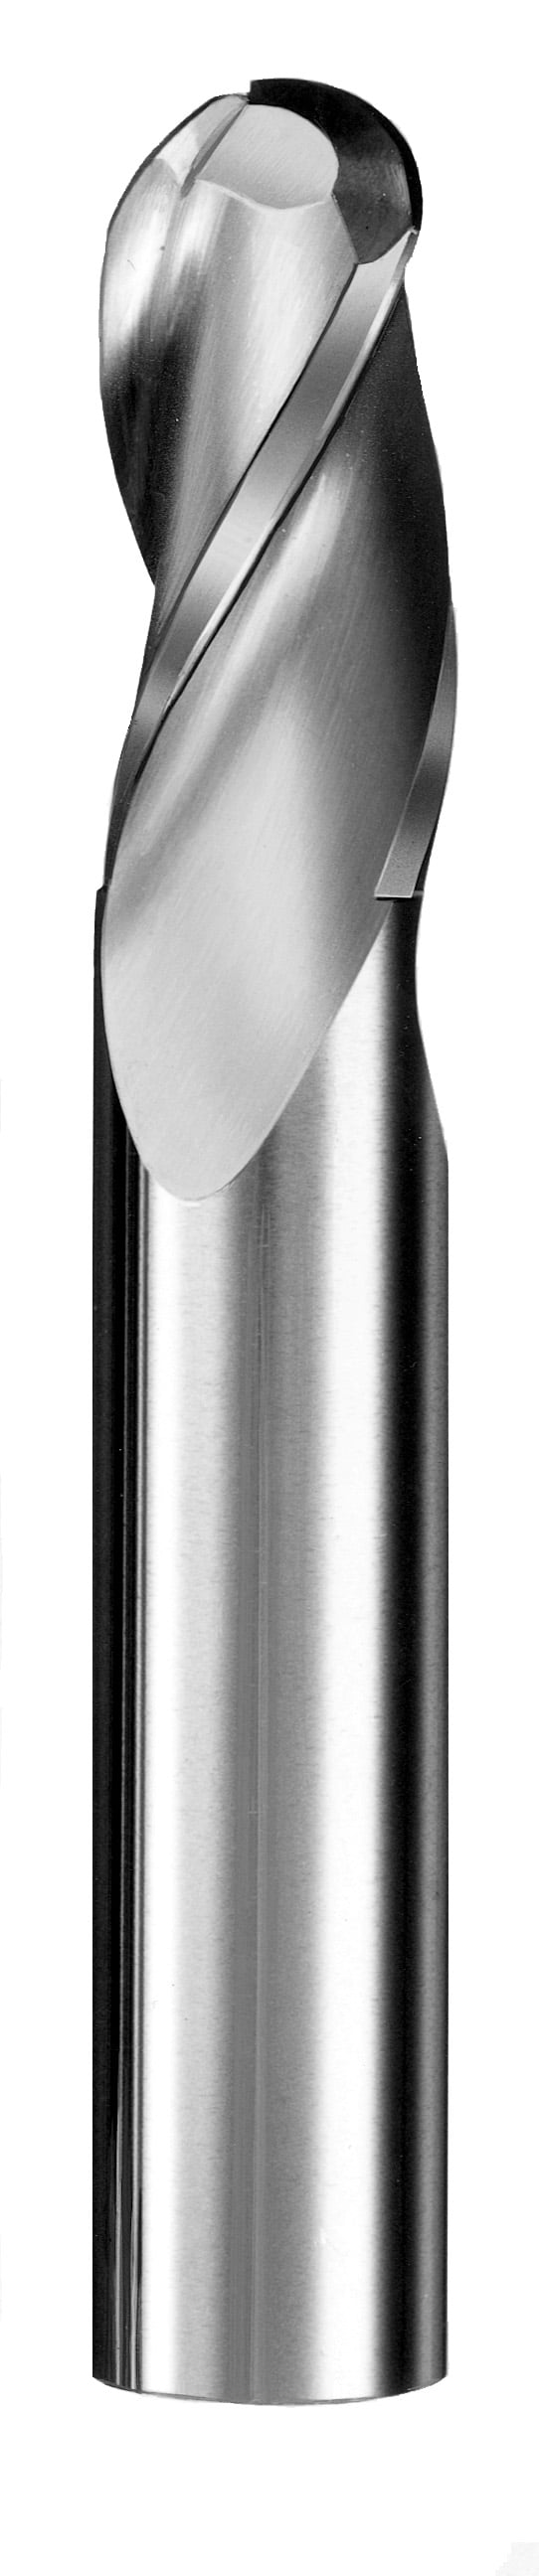 1/64" Dia, 3 Flute, Ball Nose End Mill - 30502